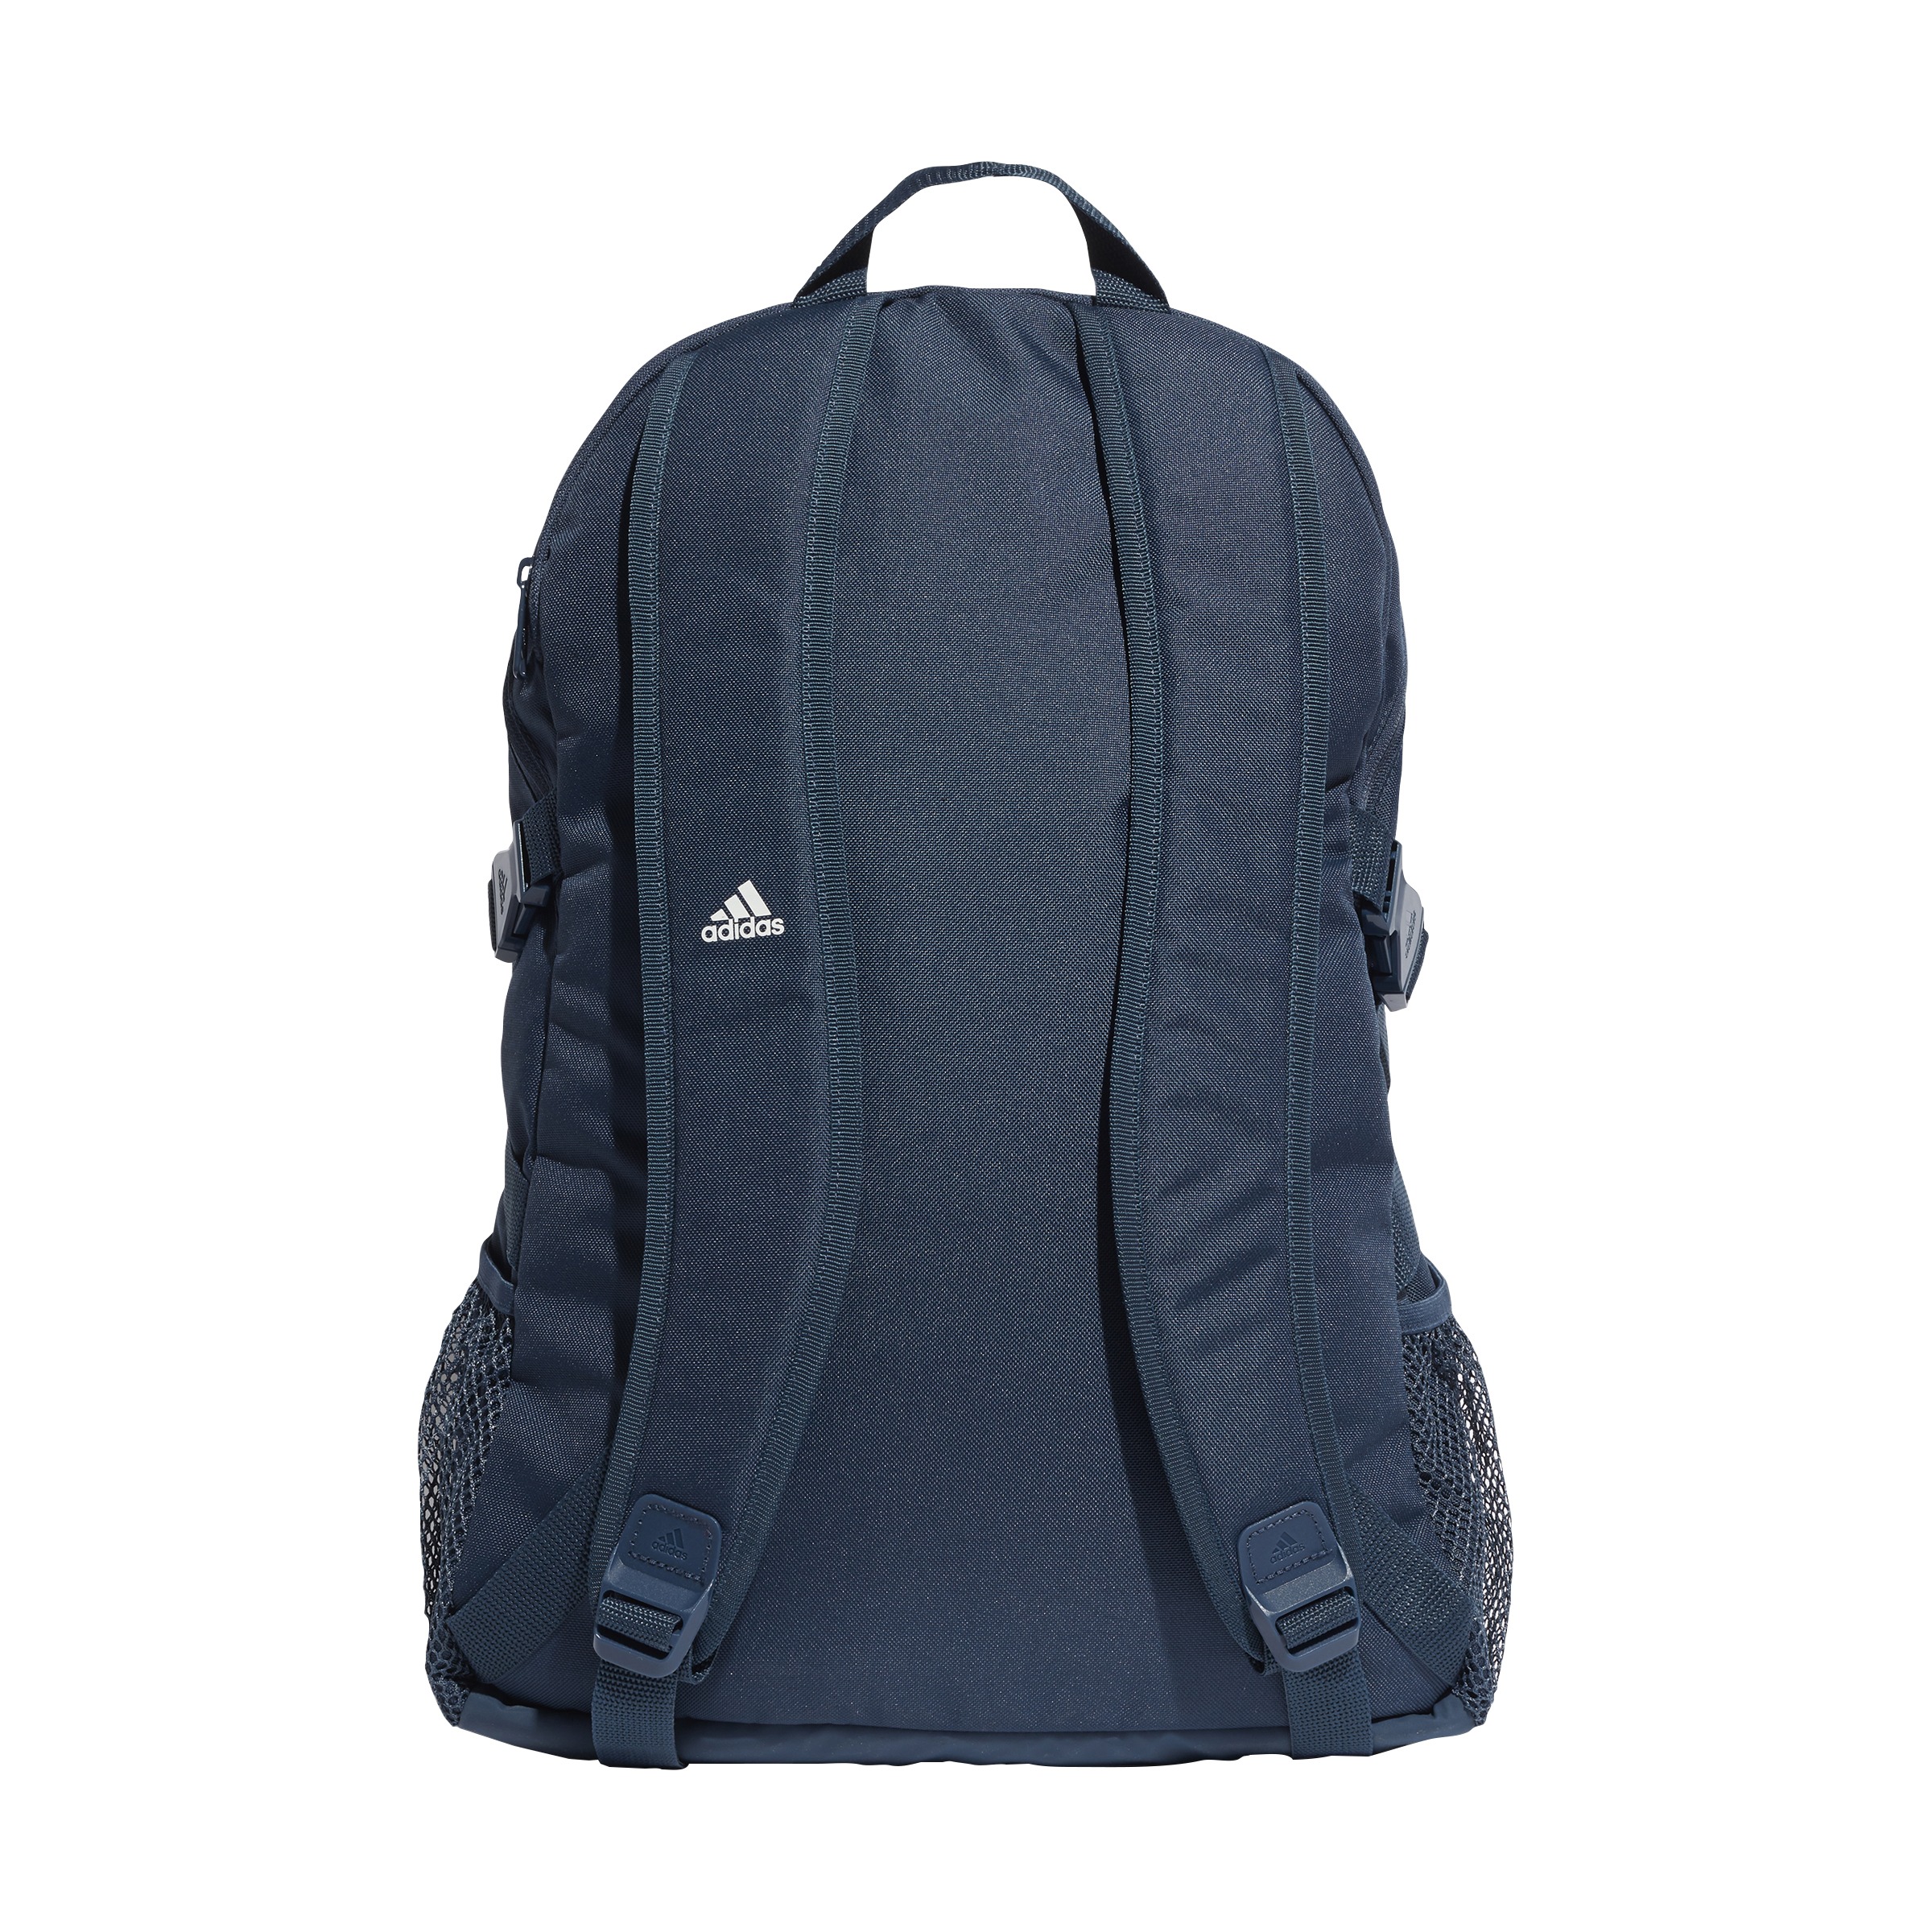 Power 5 Backpack - Navy | Southern Monograms